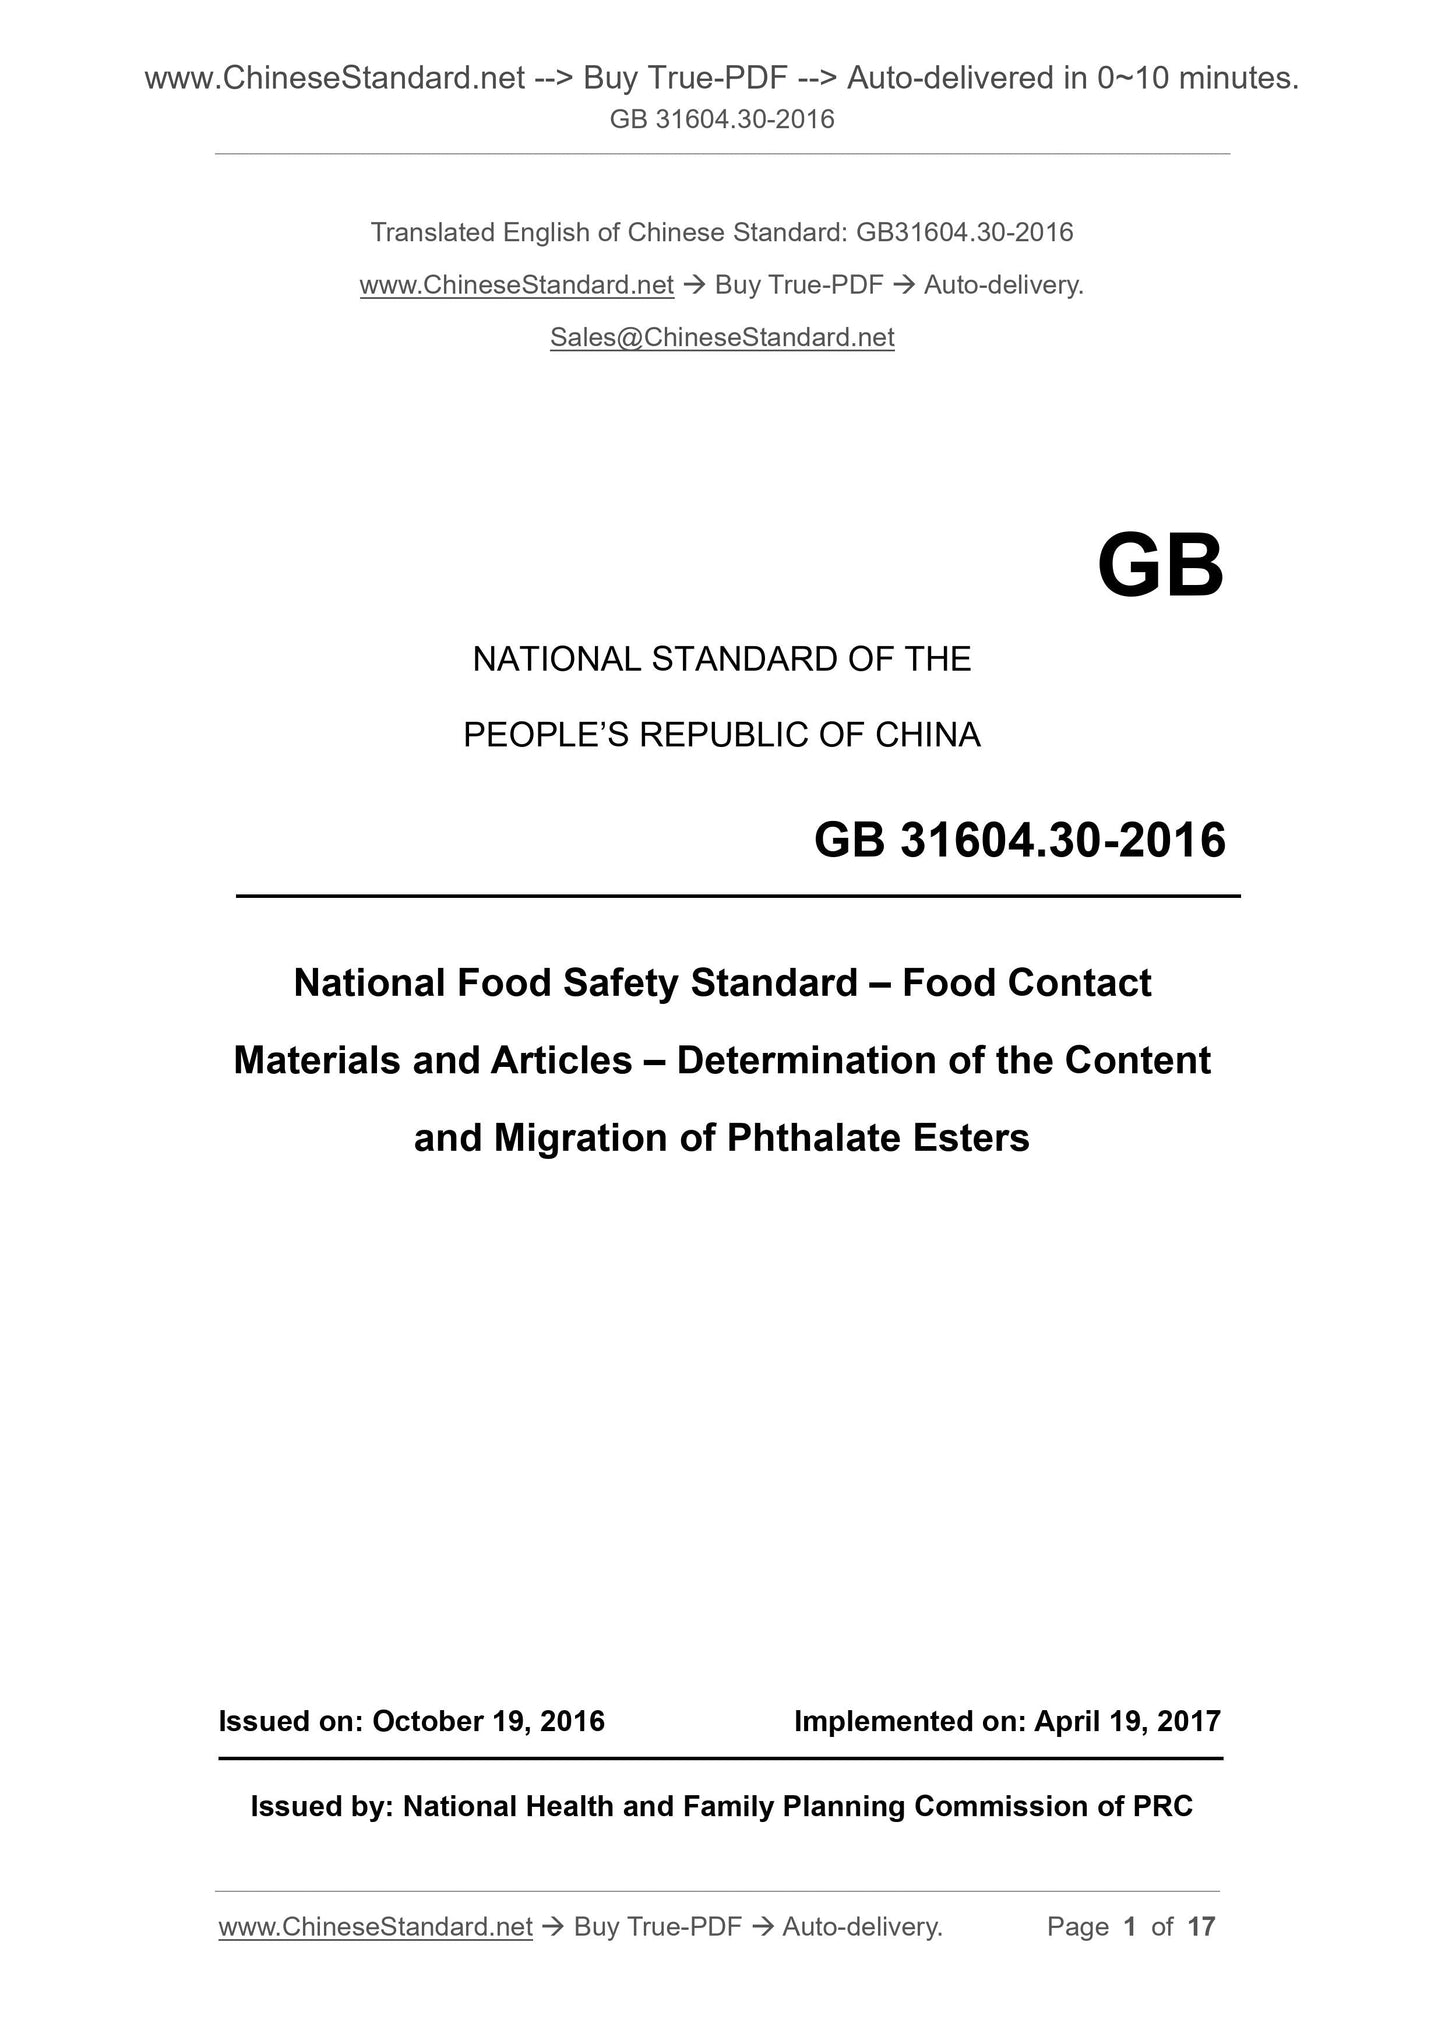 GB 31604.30-2016 Page 1